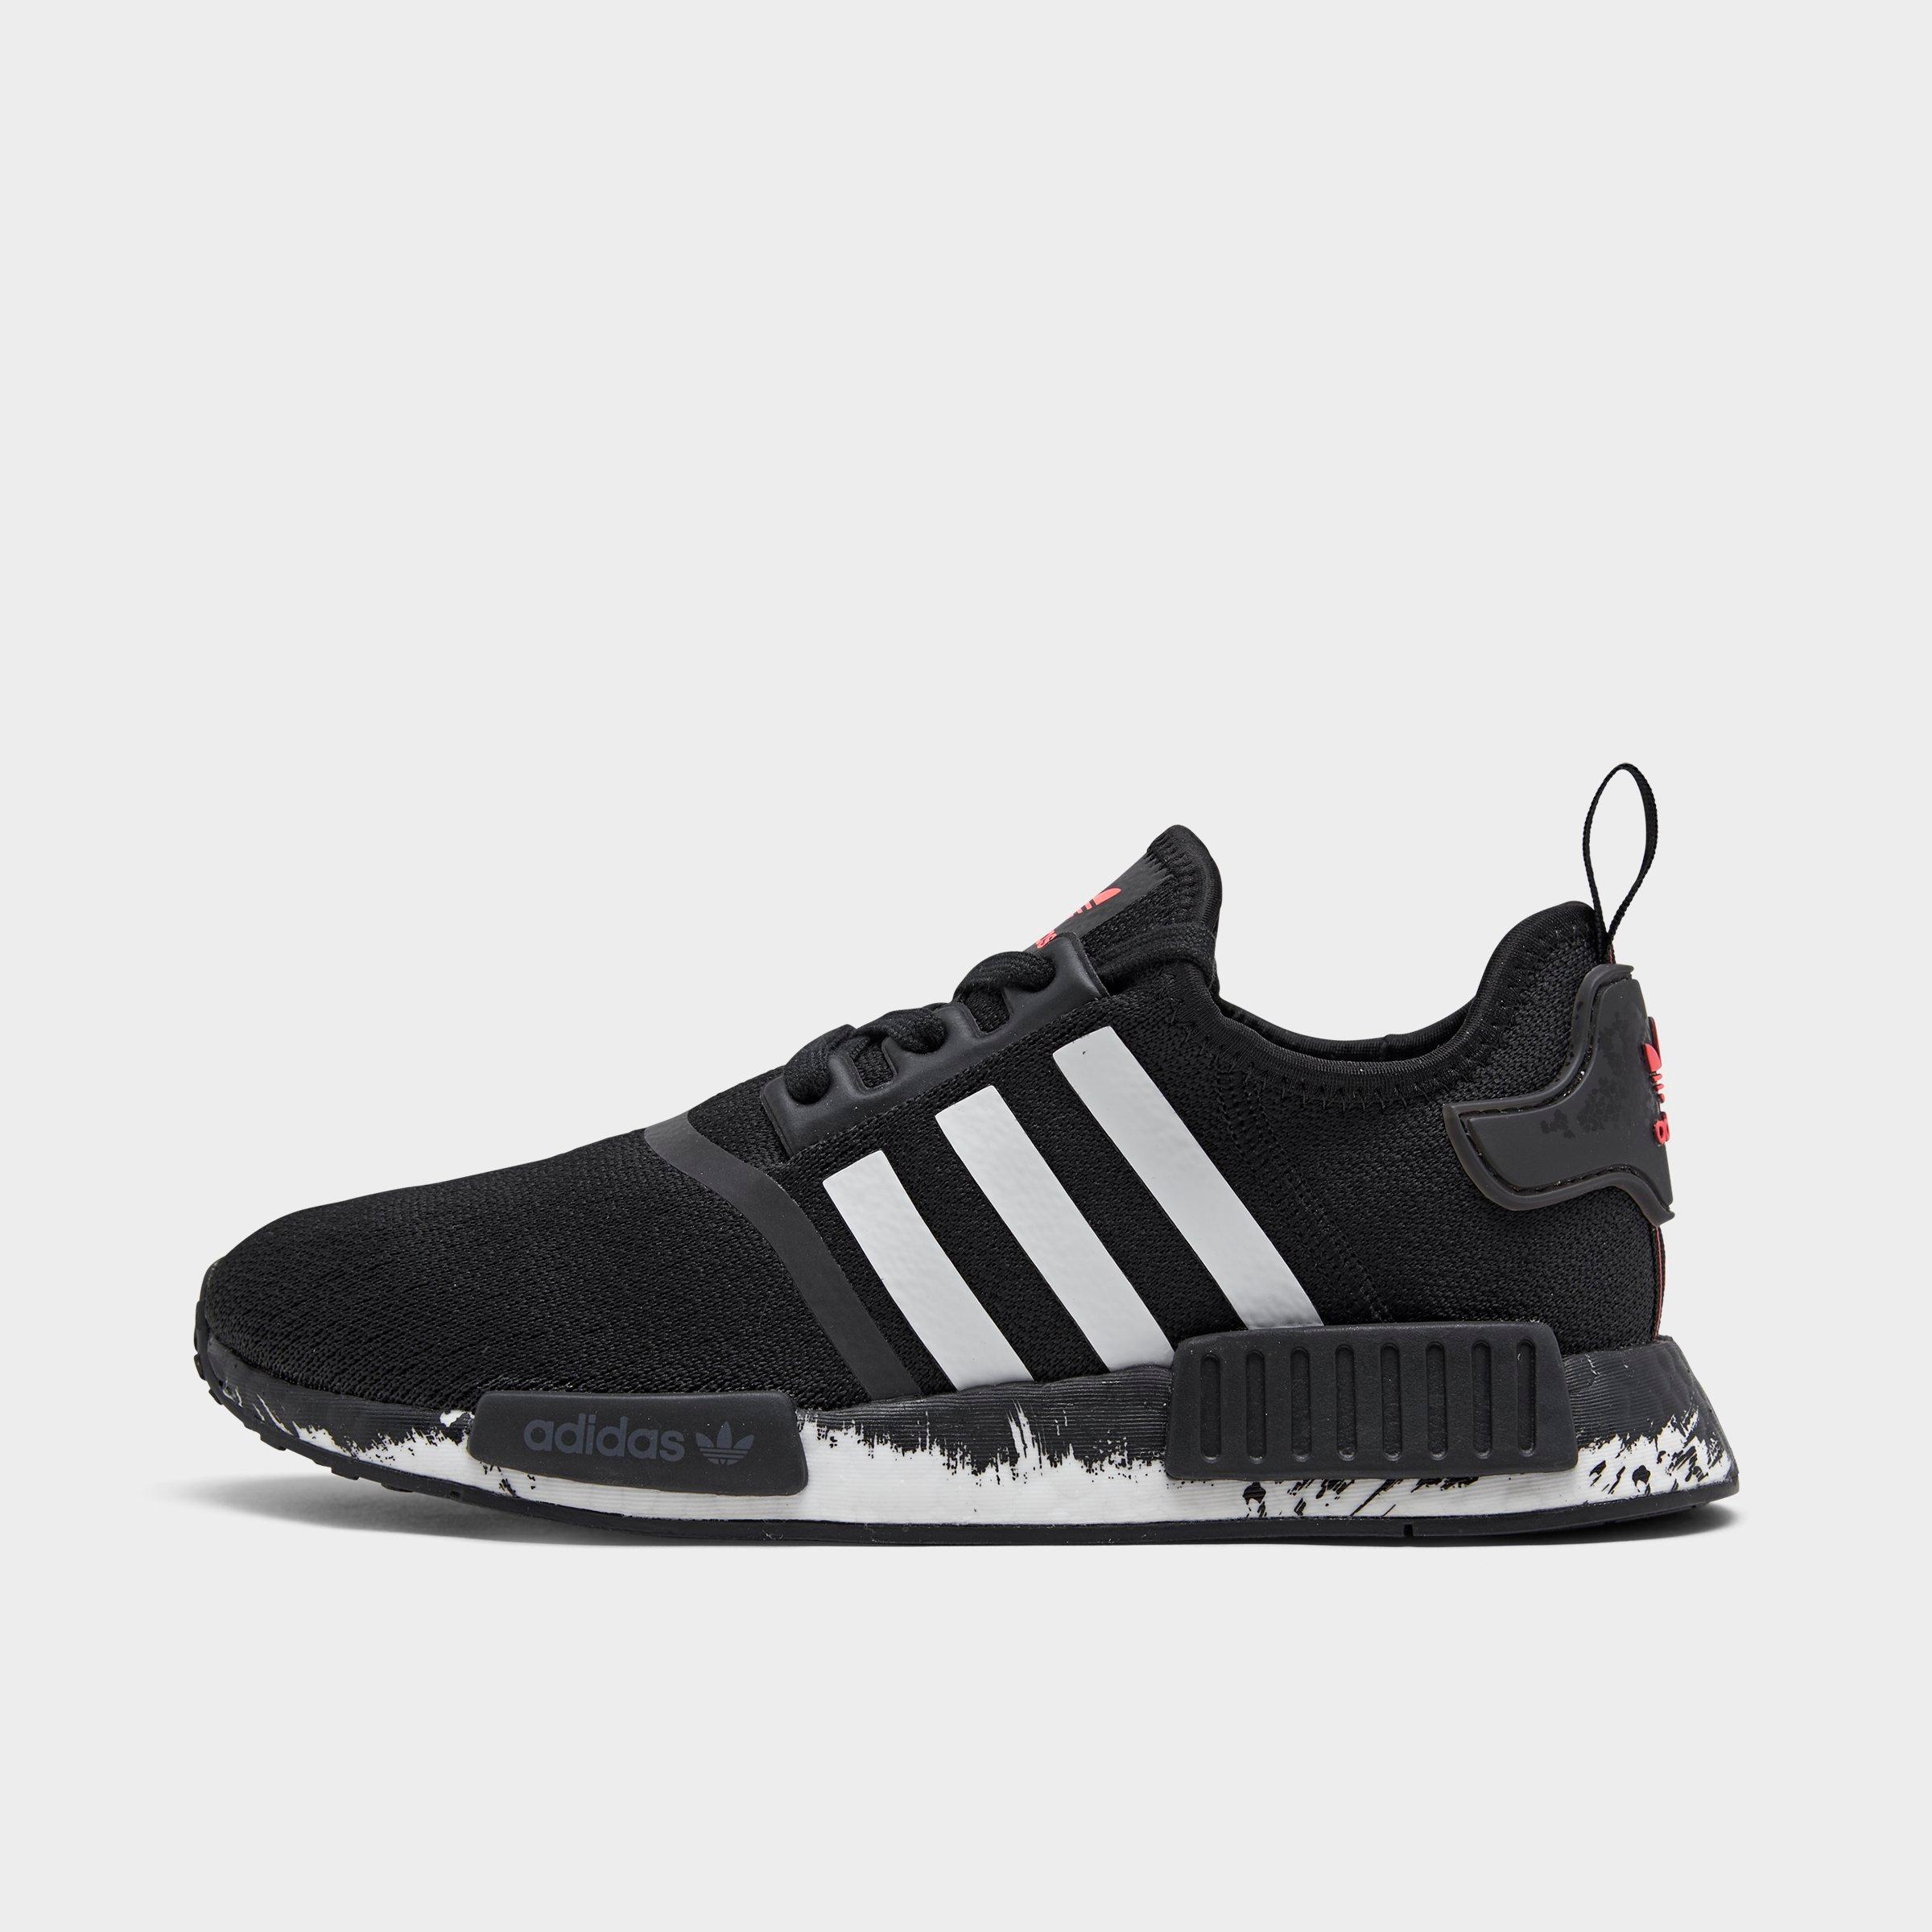 Men's adidas NMD R1 Casual Shoes 